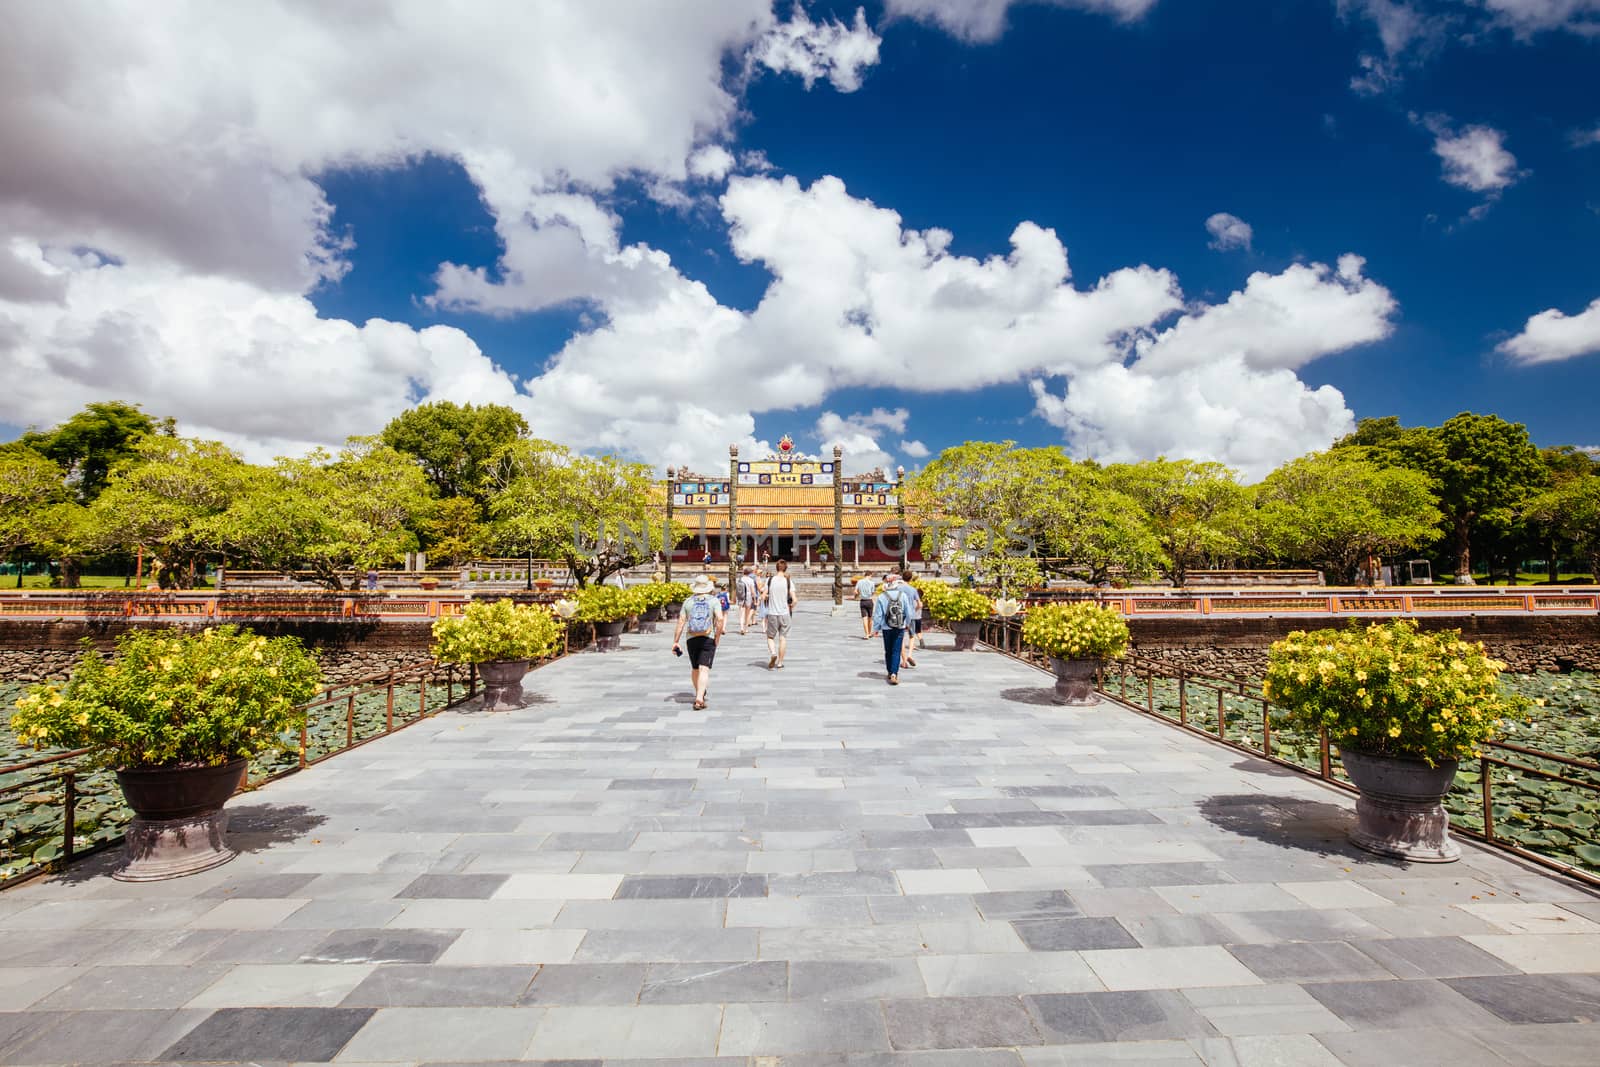 Thai Hoa Palace in the UNESCO World Heritage site of Imperial Palace and Citadel in Hue, Vietnam